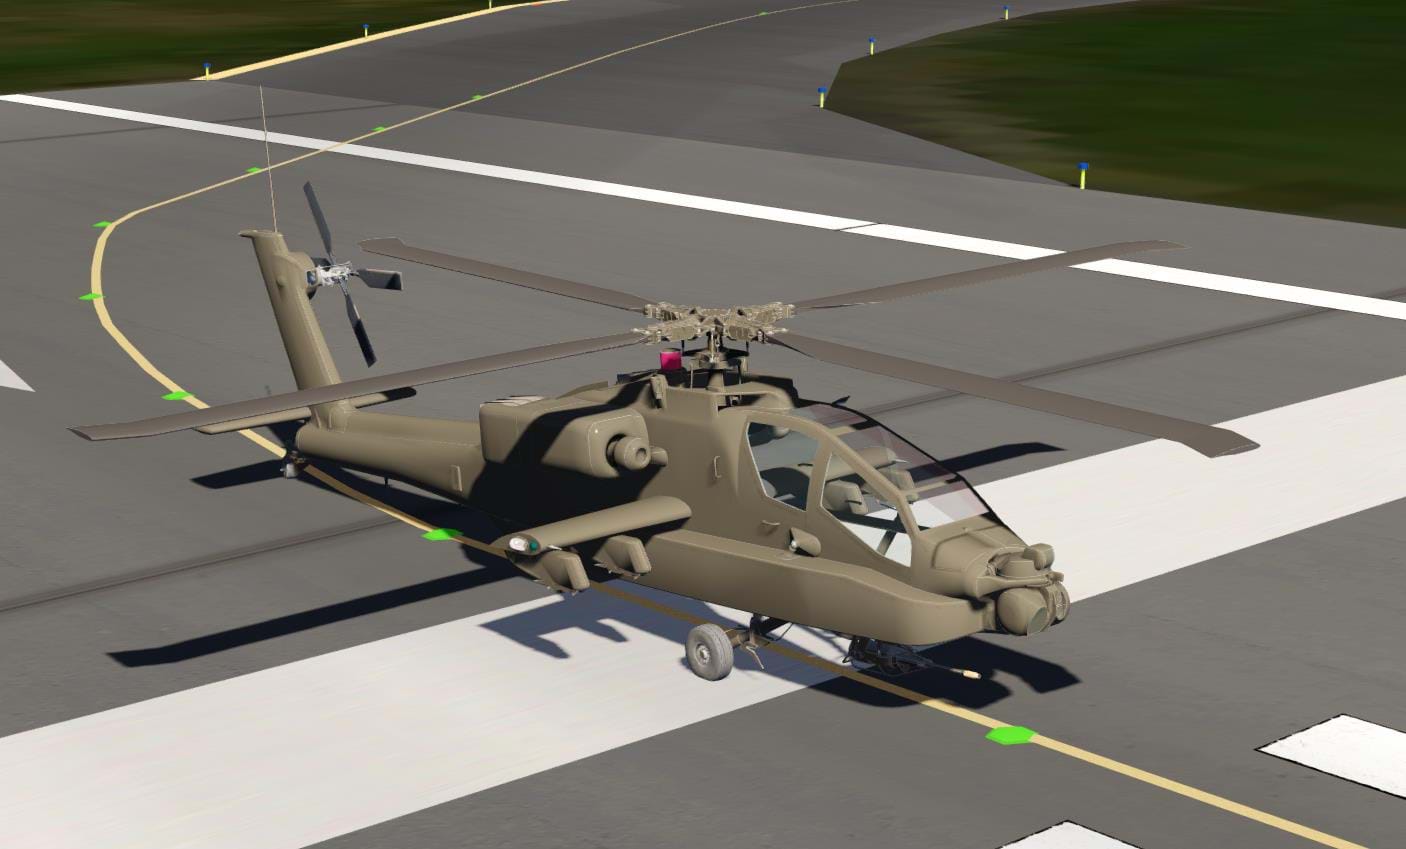 Author of the upcoming CH-53 for Aerofly FS2 is also working on an AH-64 Apache